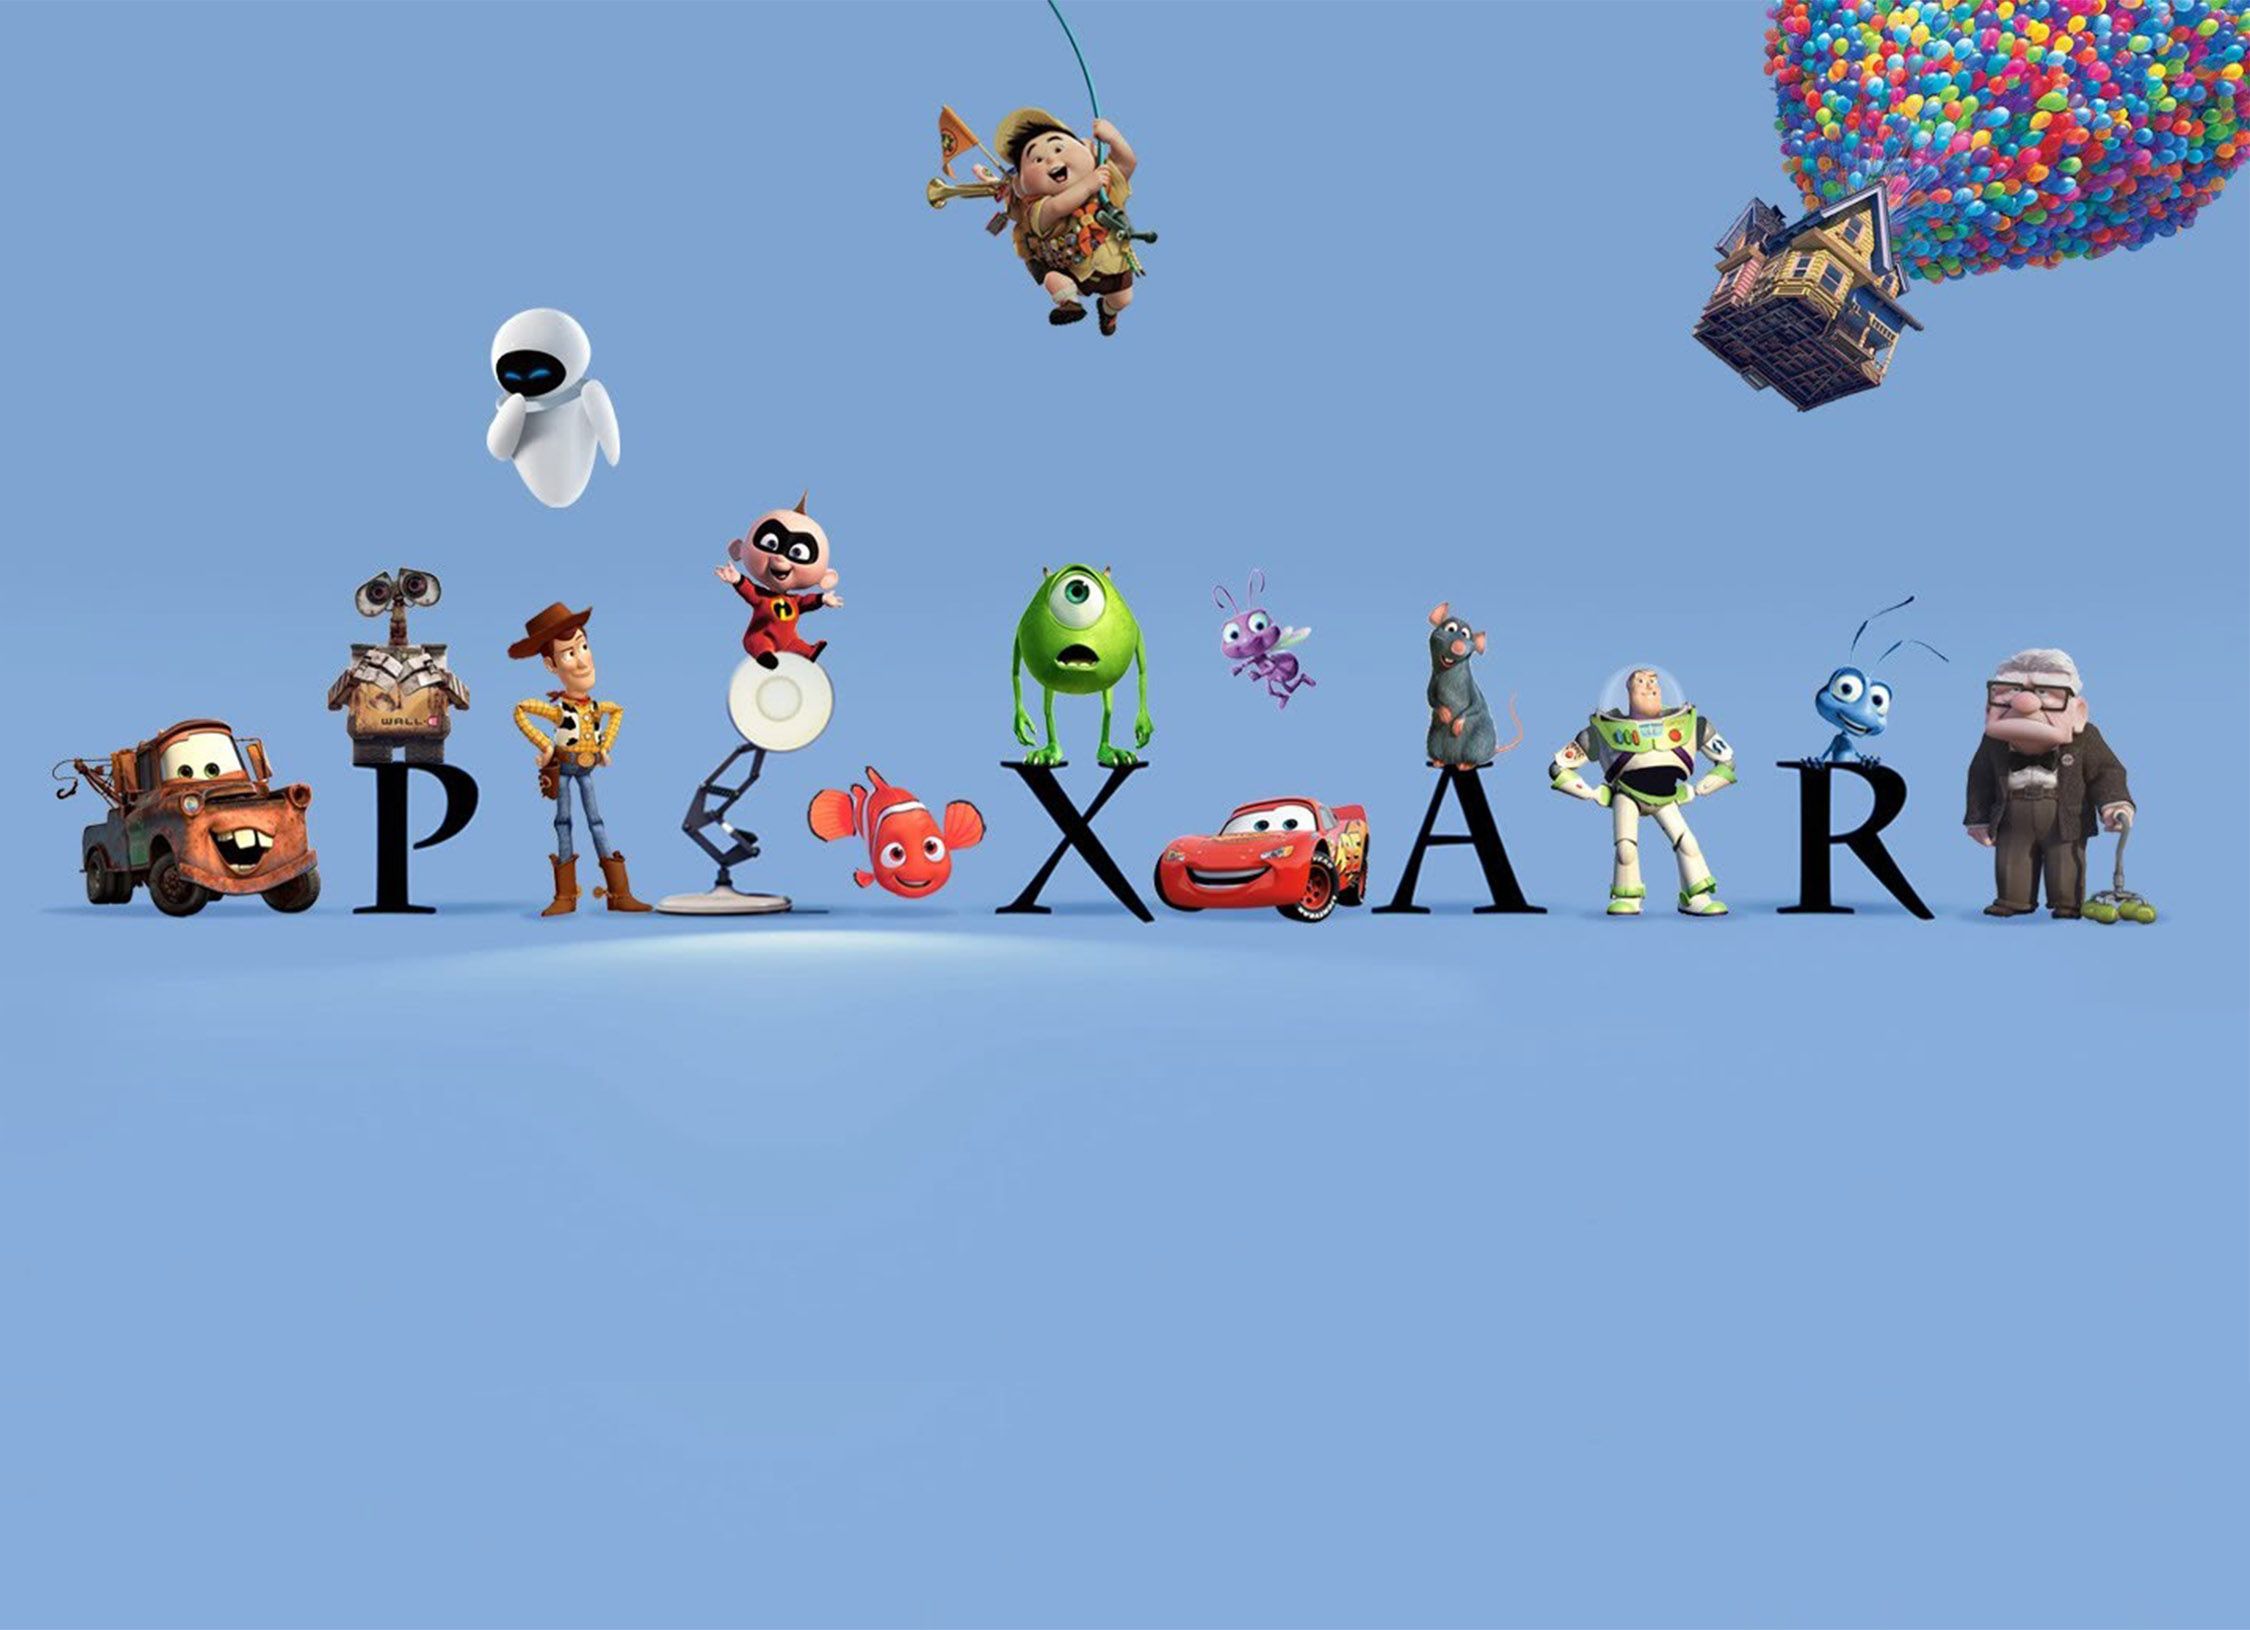 Pixar set to feature first transgender character in new project